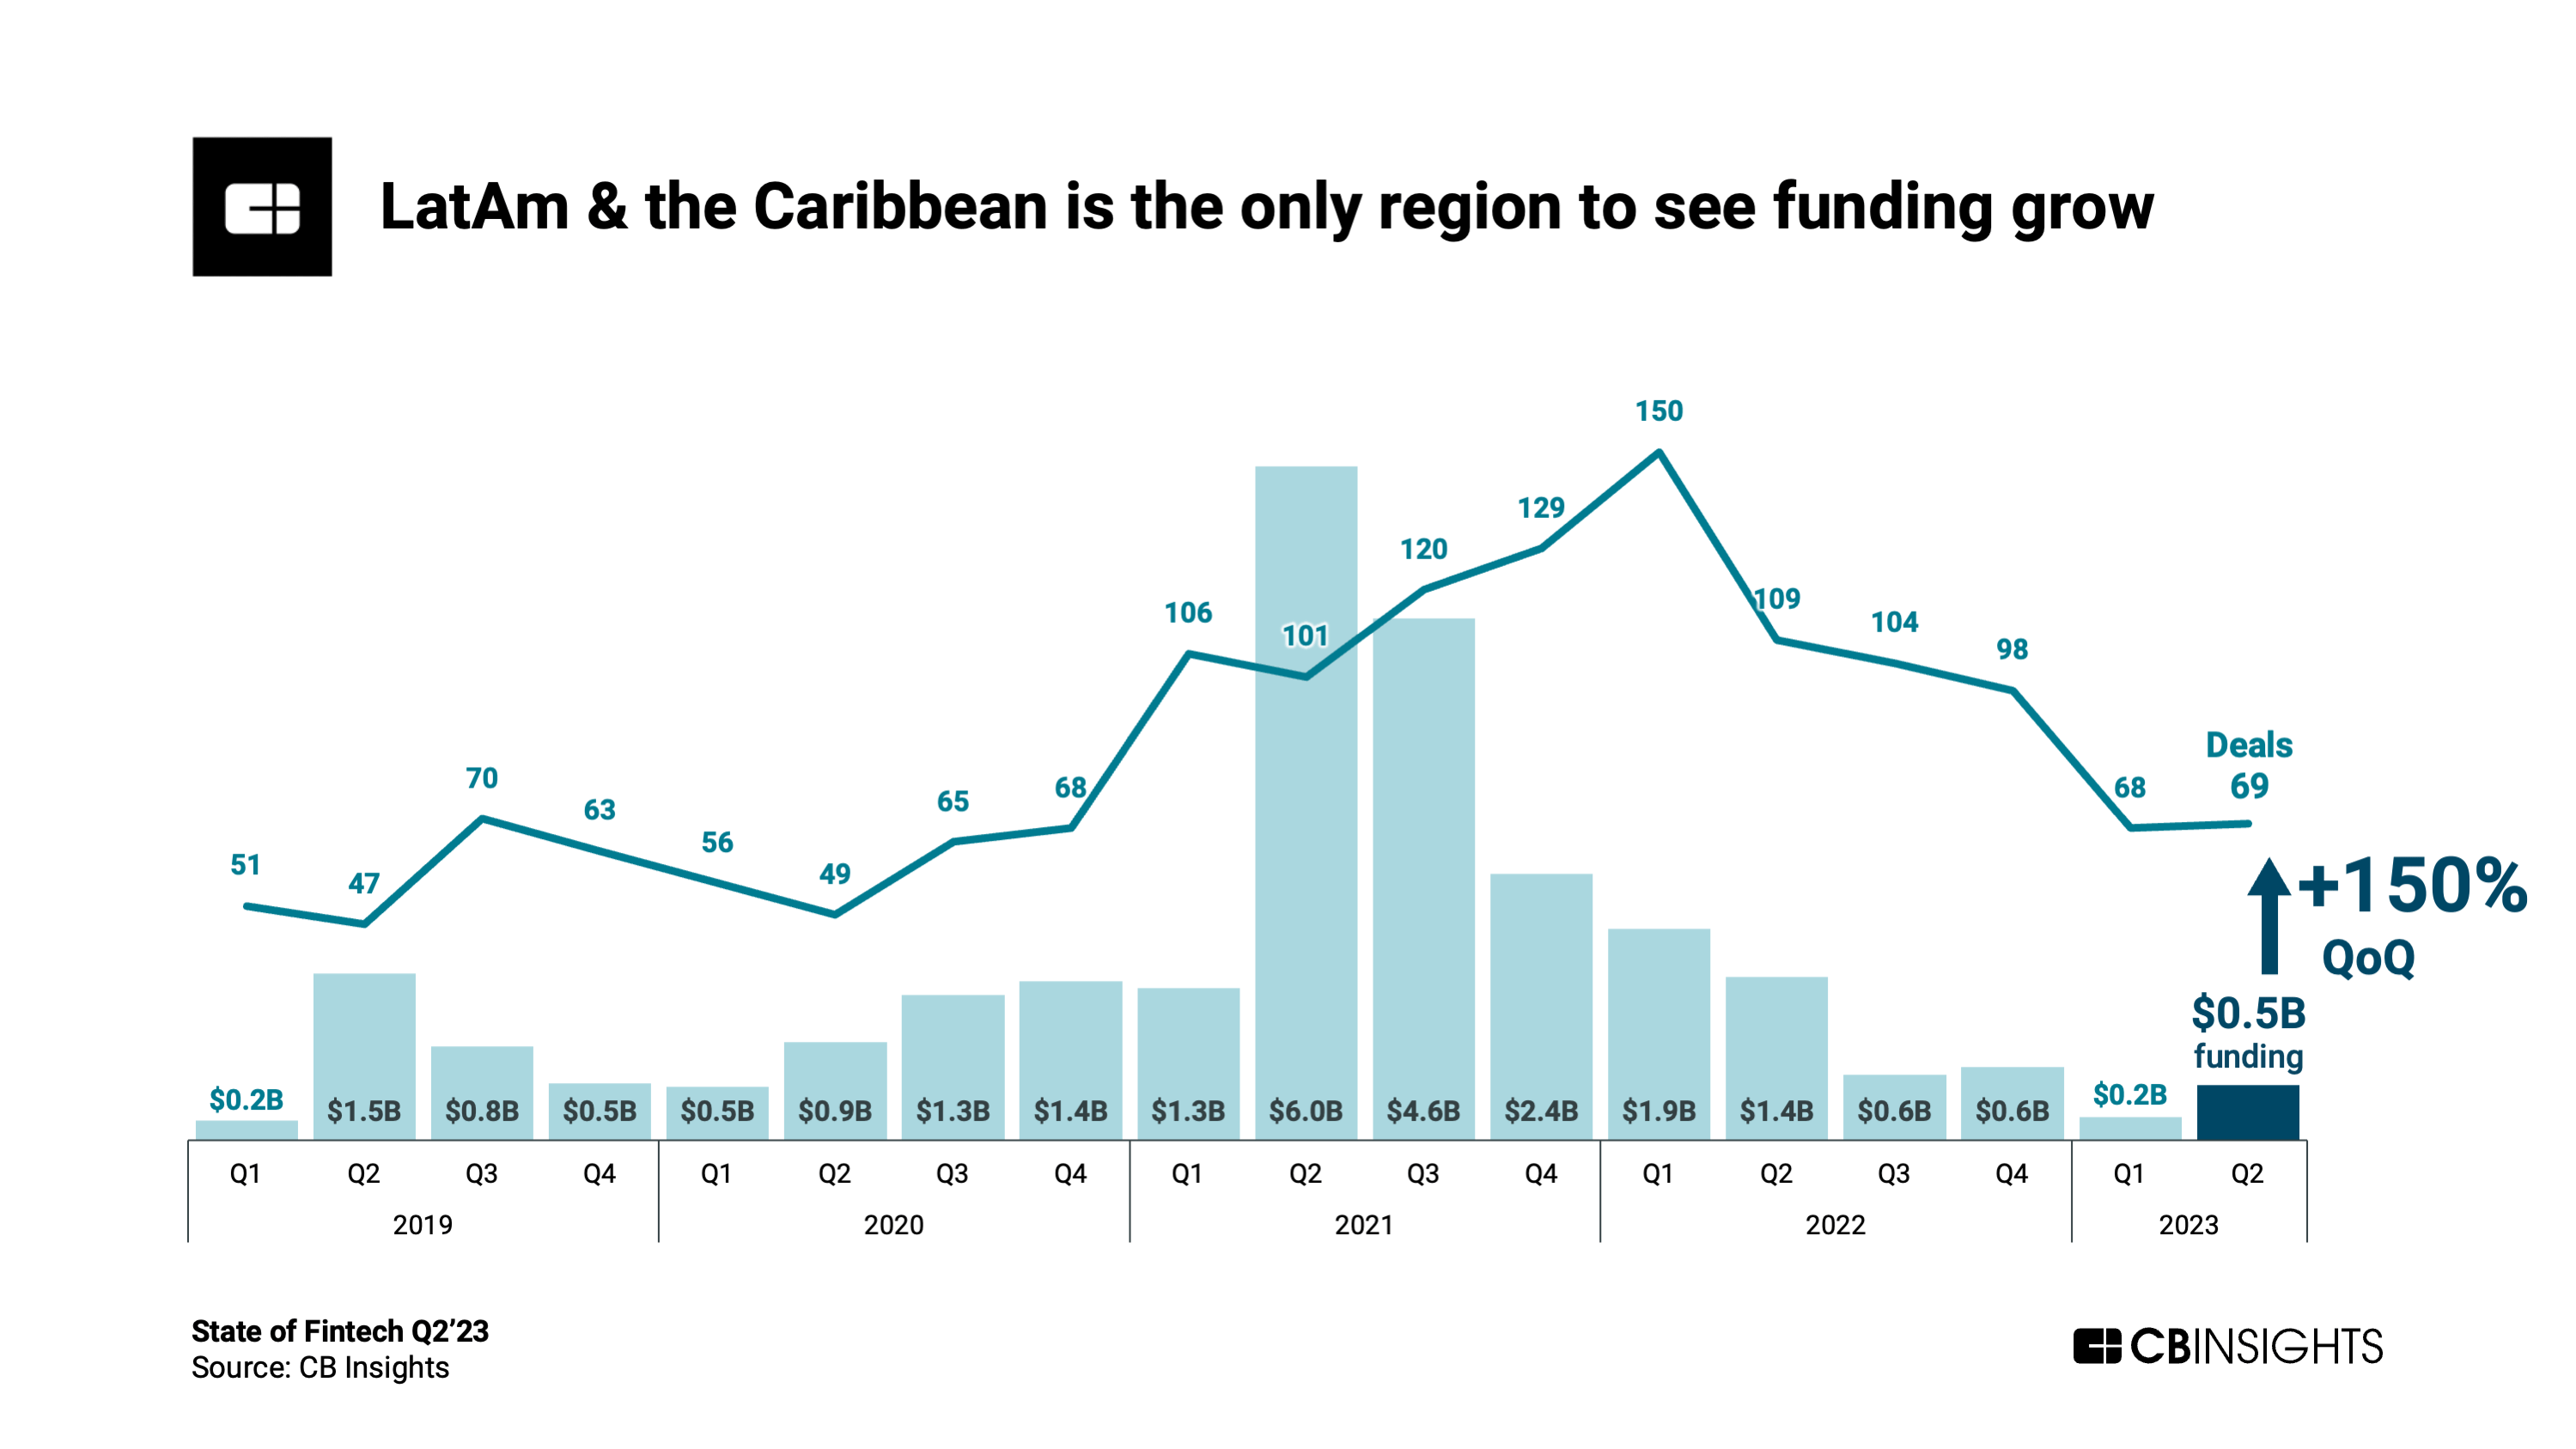 Fintech funding in Latin America and the Caribbeans in Q2 2023, Source: State of Fintech Q2 2023, CB Insights, July 2023